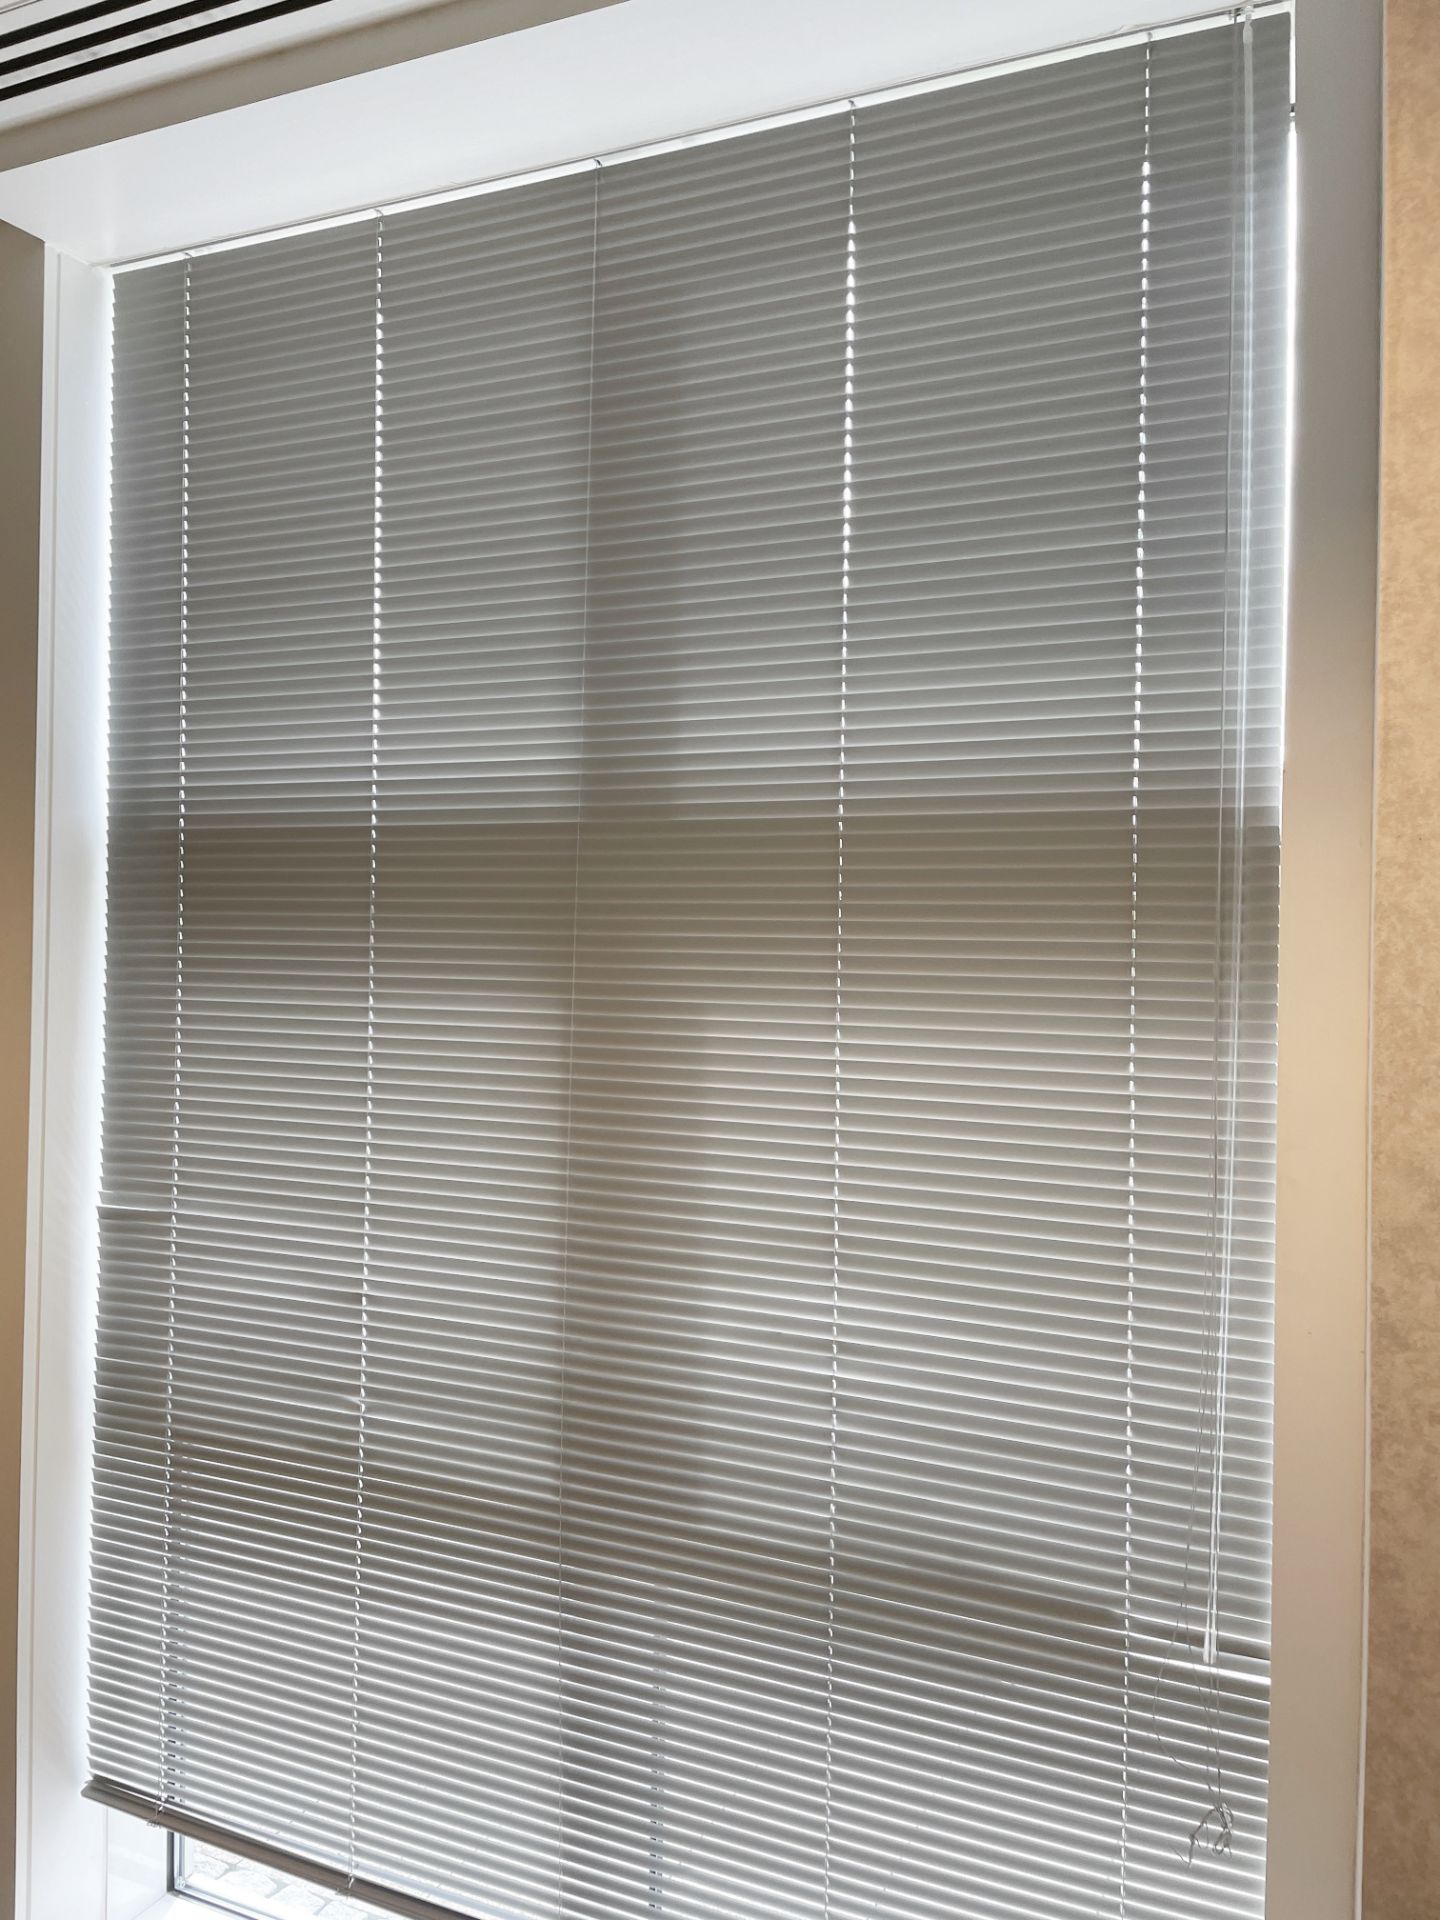 1 x Window Blind With A 2.5 Metre Drop - Dimensions: 170 x H255cm - Ref: ED158F - To Be Removed From